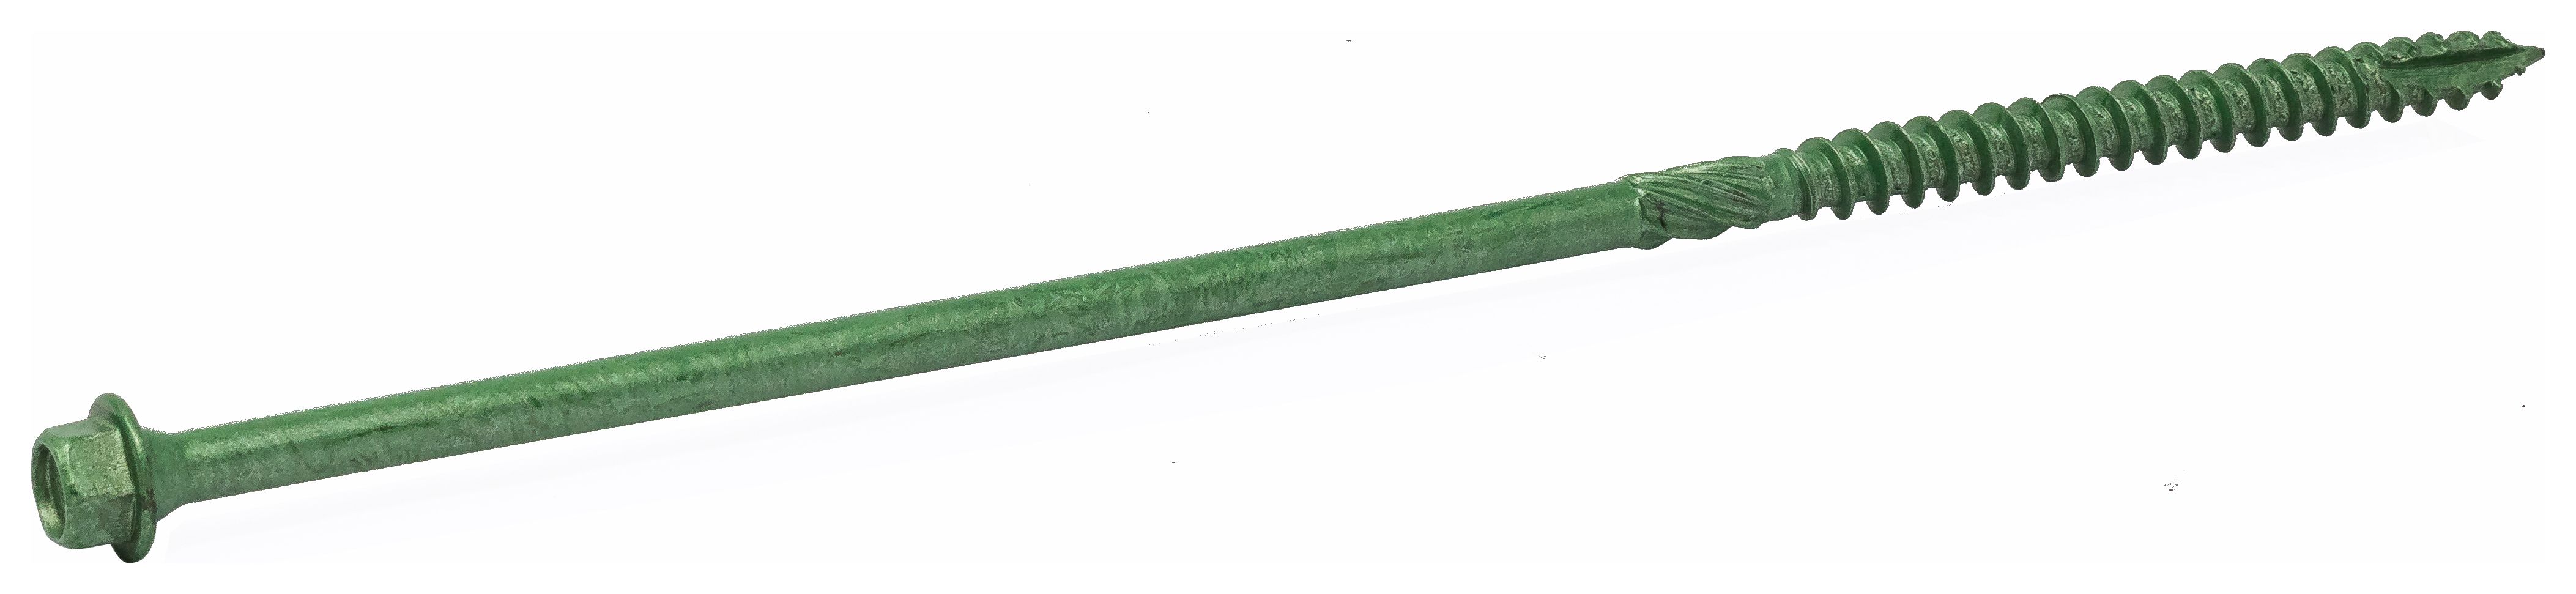 Image of Wickes Timber Drive Hex Head Green Screw - 7x100mm Pack Of 50